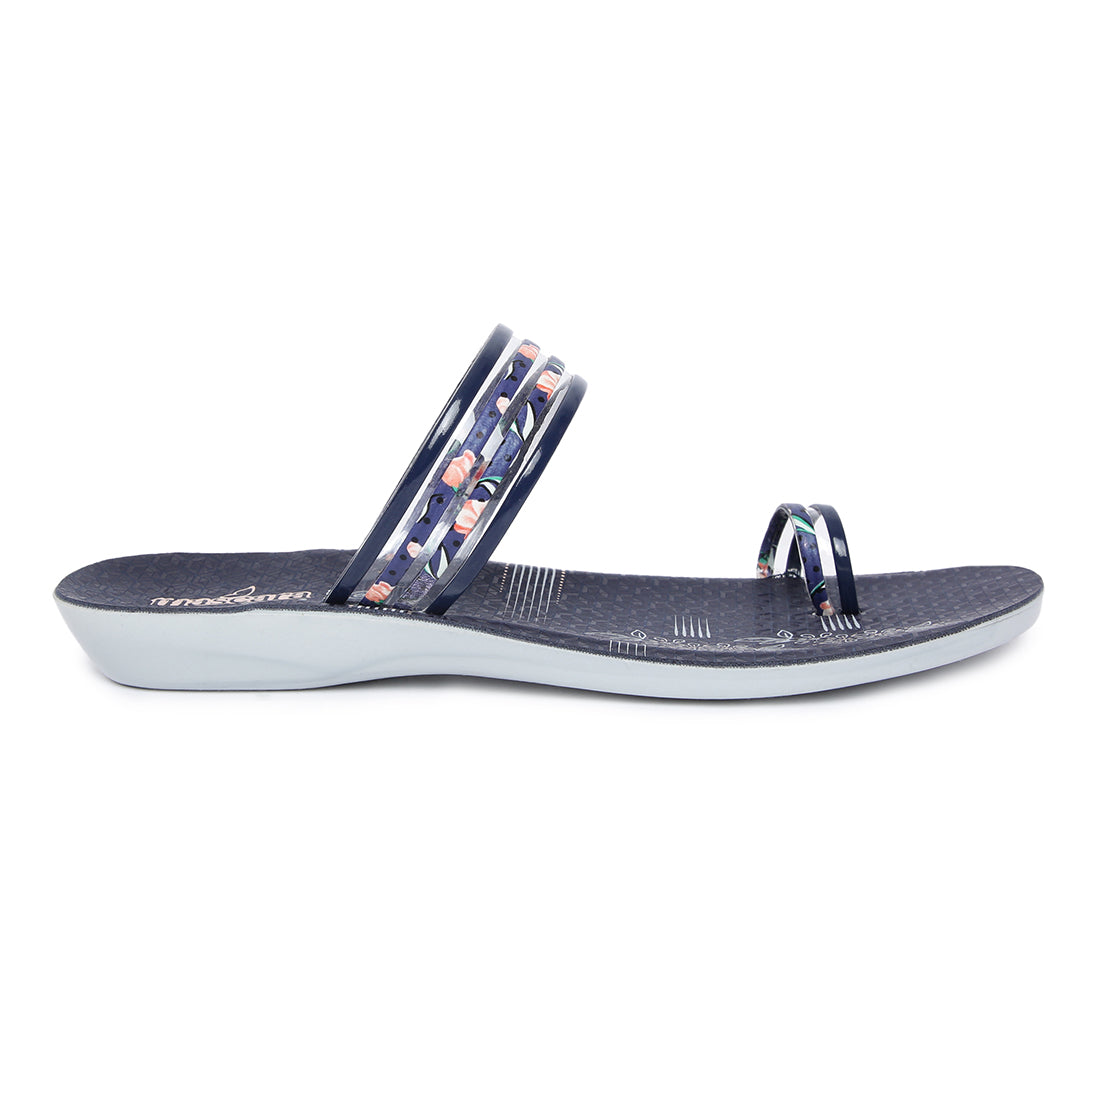 Paragon PU5240L Women Sandals | Casual &amp; Formal Sandals | Stylish, Comfortable &amp; Durable | For Daily &amp; Occasion Wear